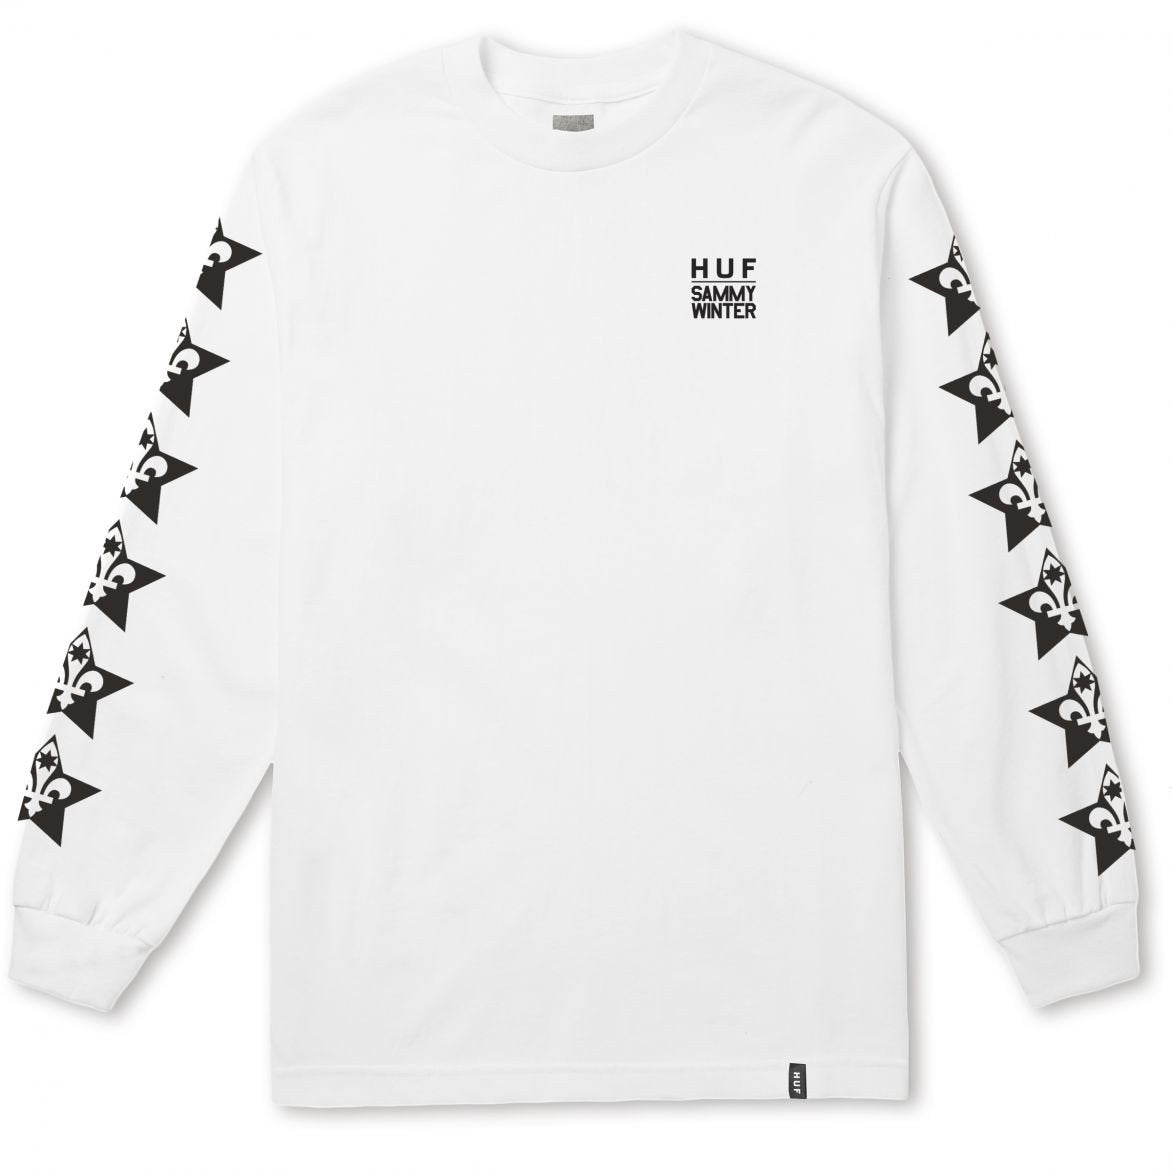 HUF X SAMMY WINTER LS TEE \\ WHITE-The Collateral